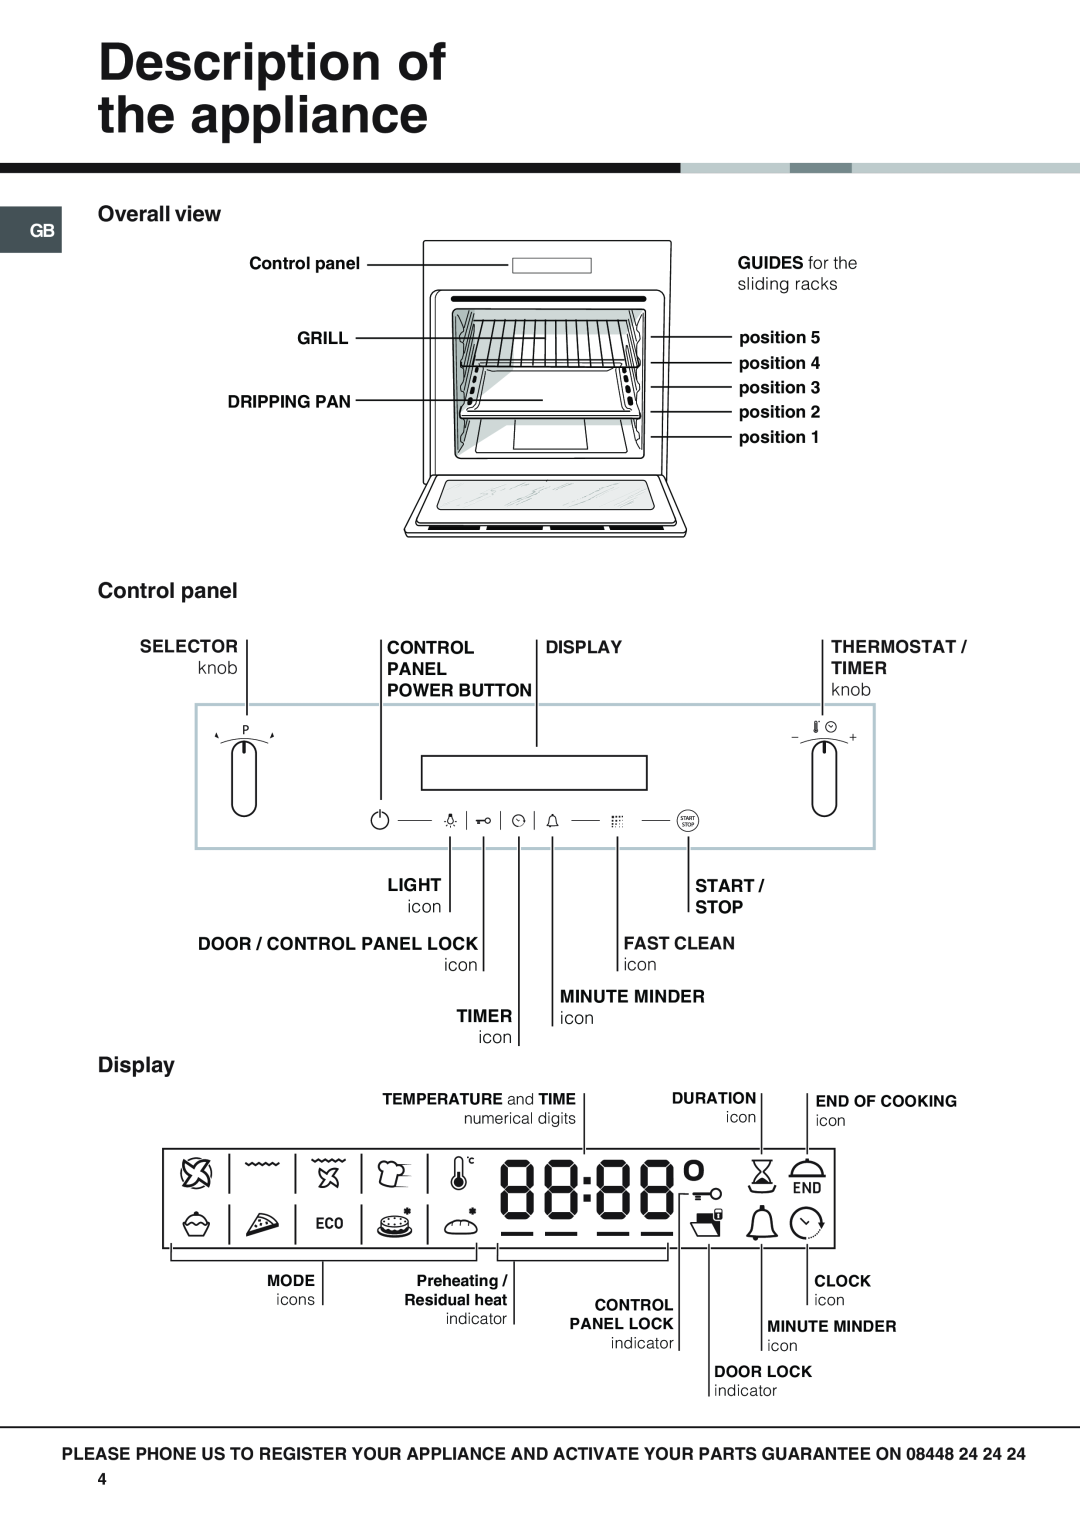 Hotpoint SX 896L PX manual Description of the appliance, Overall view, Control panel, Display 